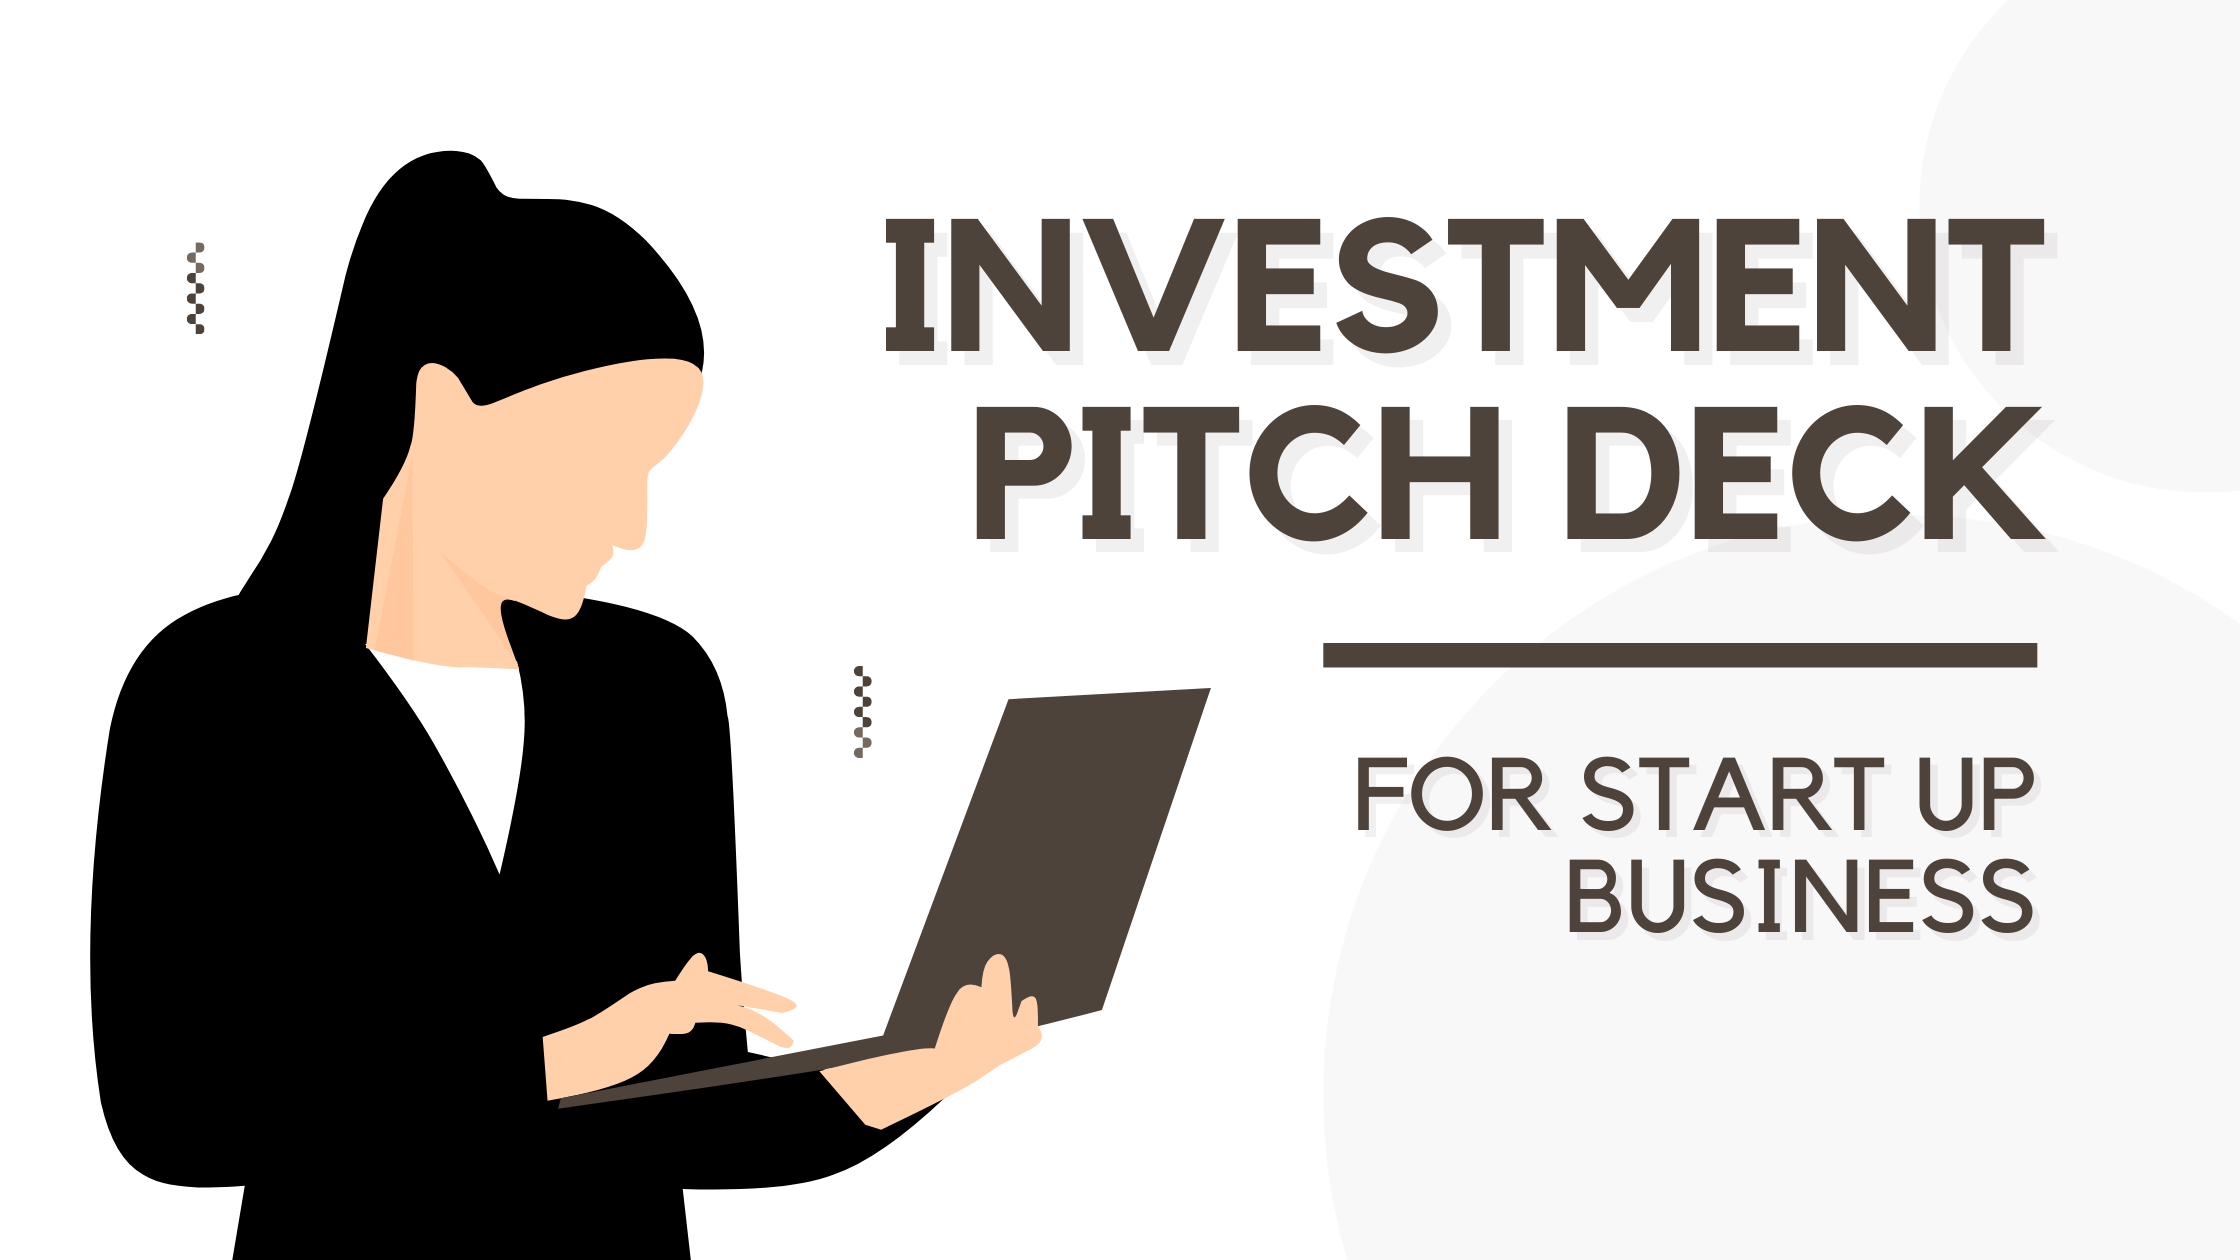 5 Essential components for an Investor Pitch Deck for Startups